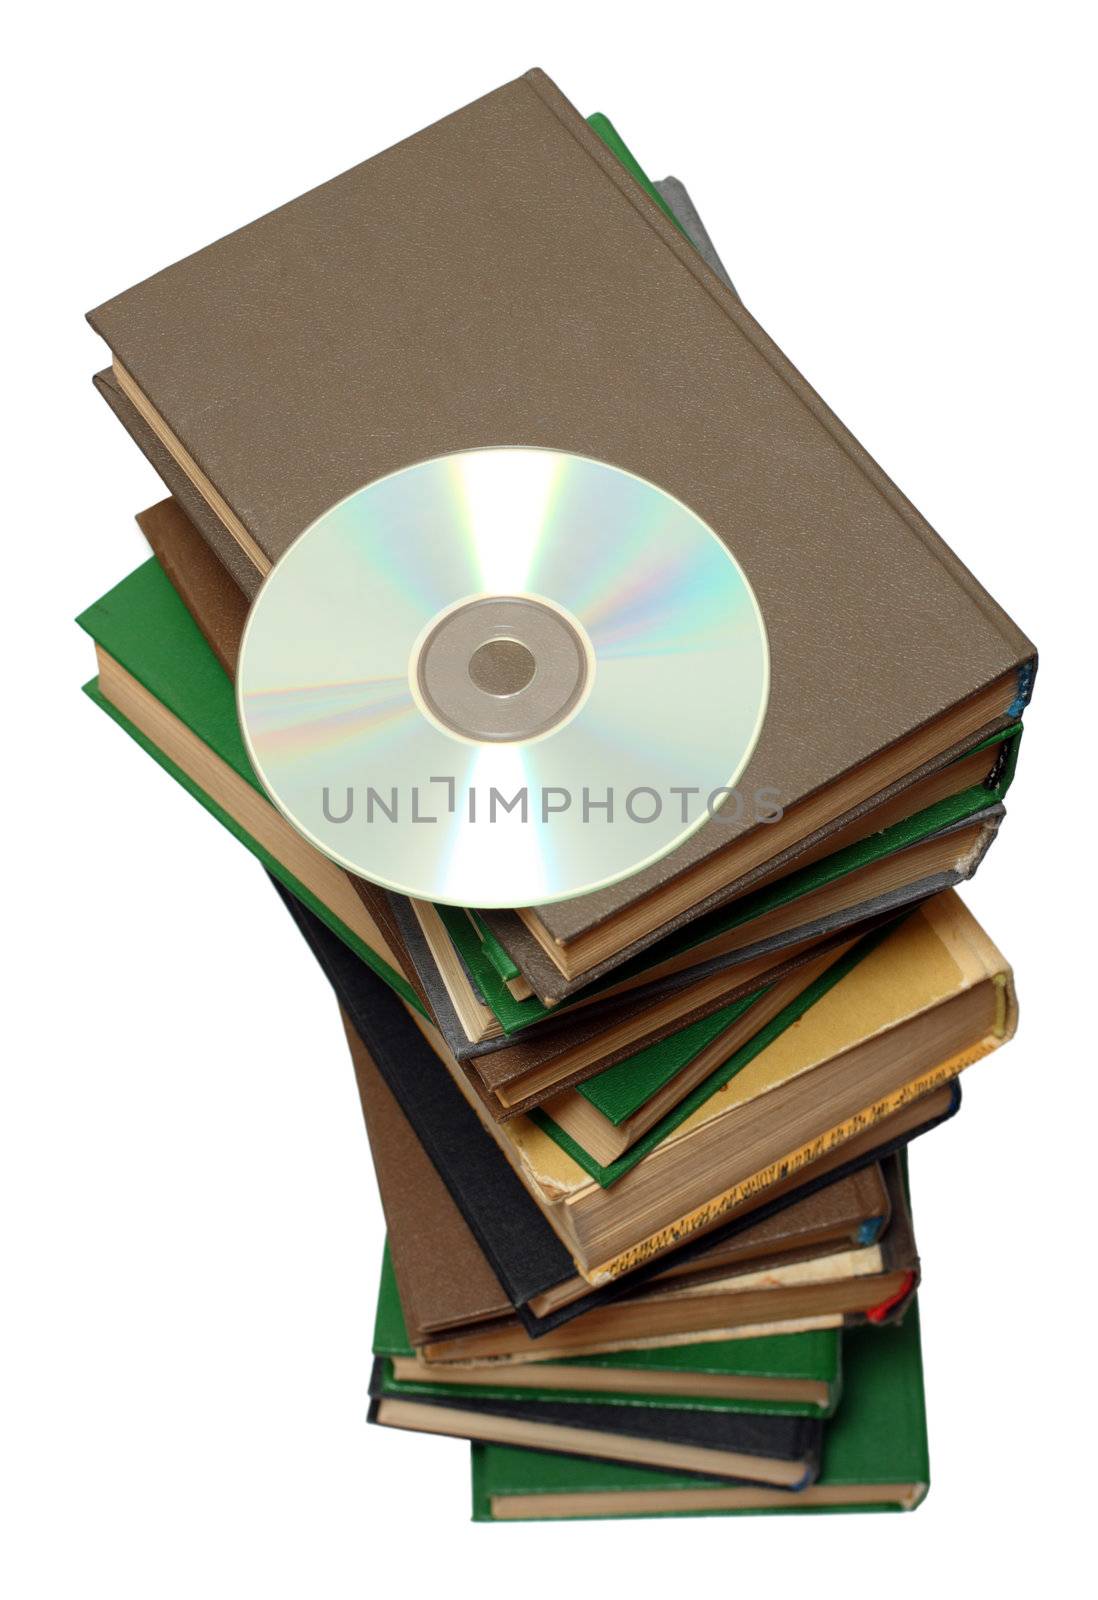 information carrier progress - one cd disc instead stack of books